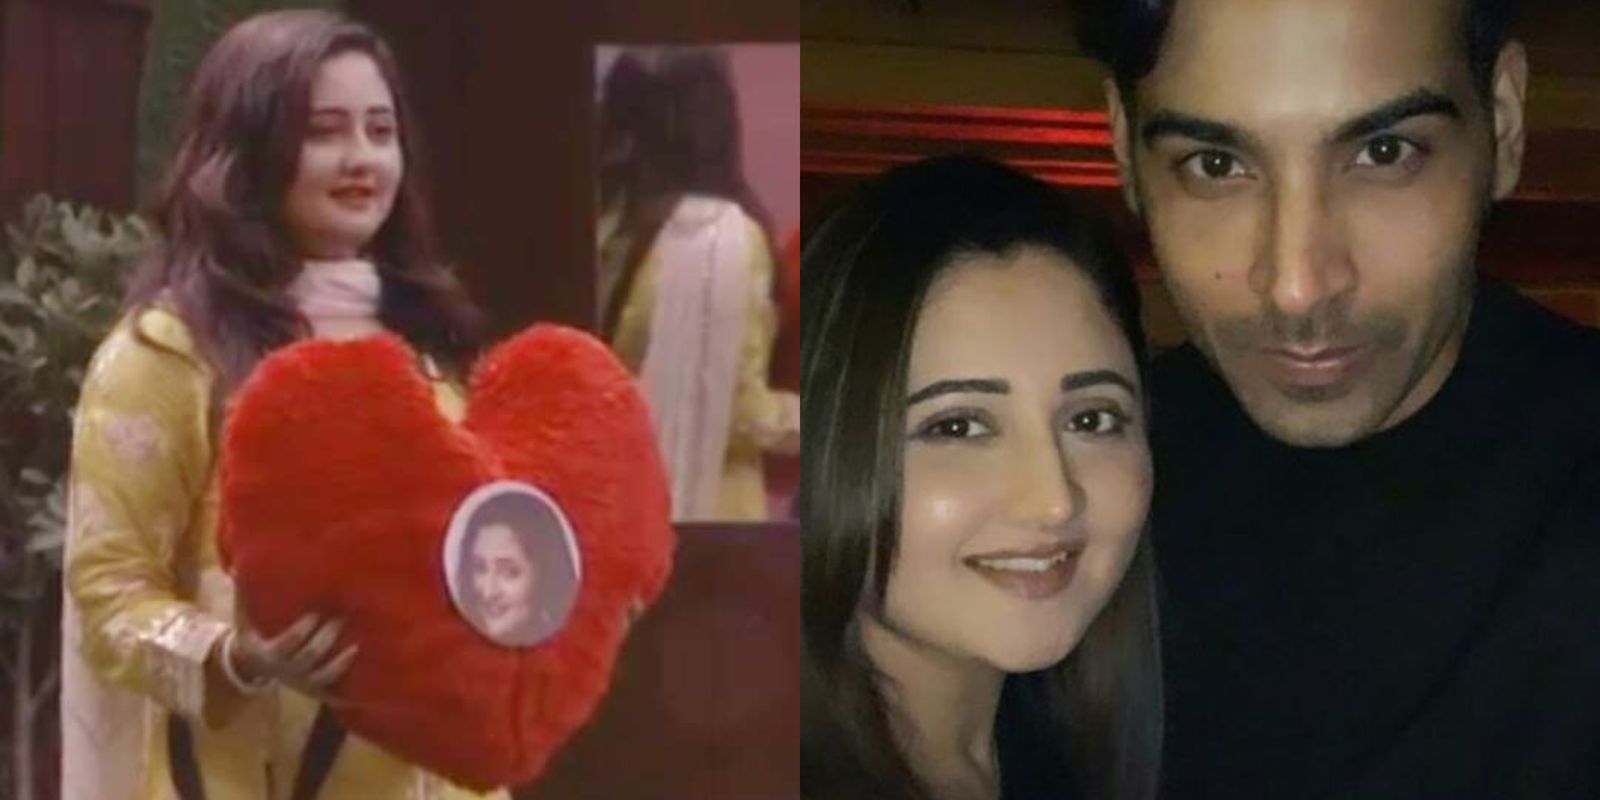 Bigg Boss 13: Rashmi Desai Opens Up About Her Feeling For Arhaan Khan Says She Likes Him A Lot, Want To Settle Down Next Year